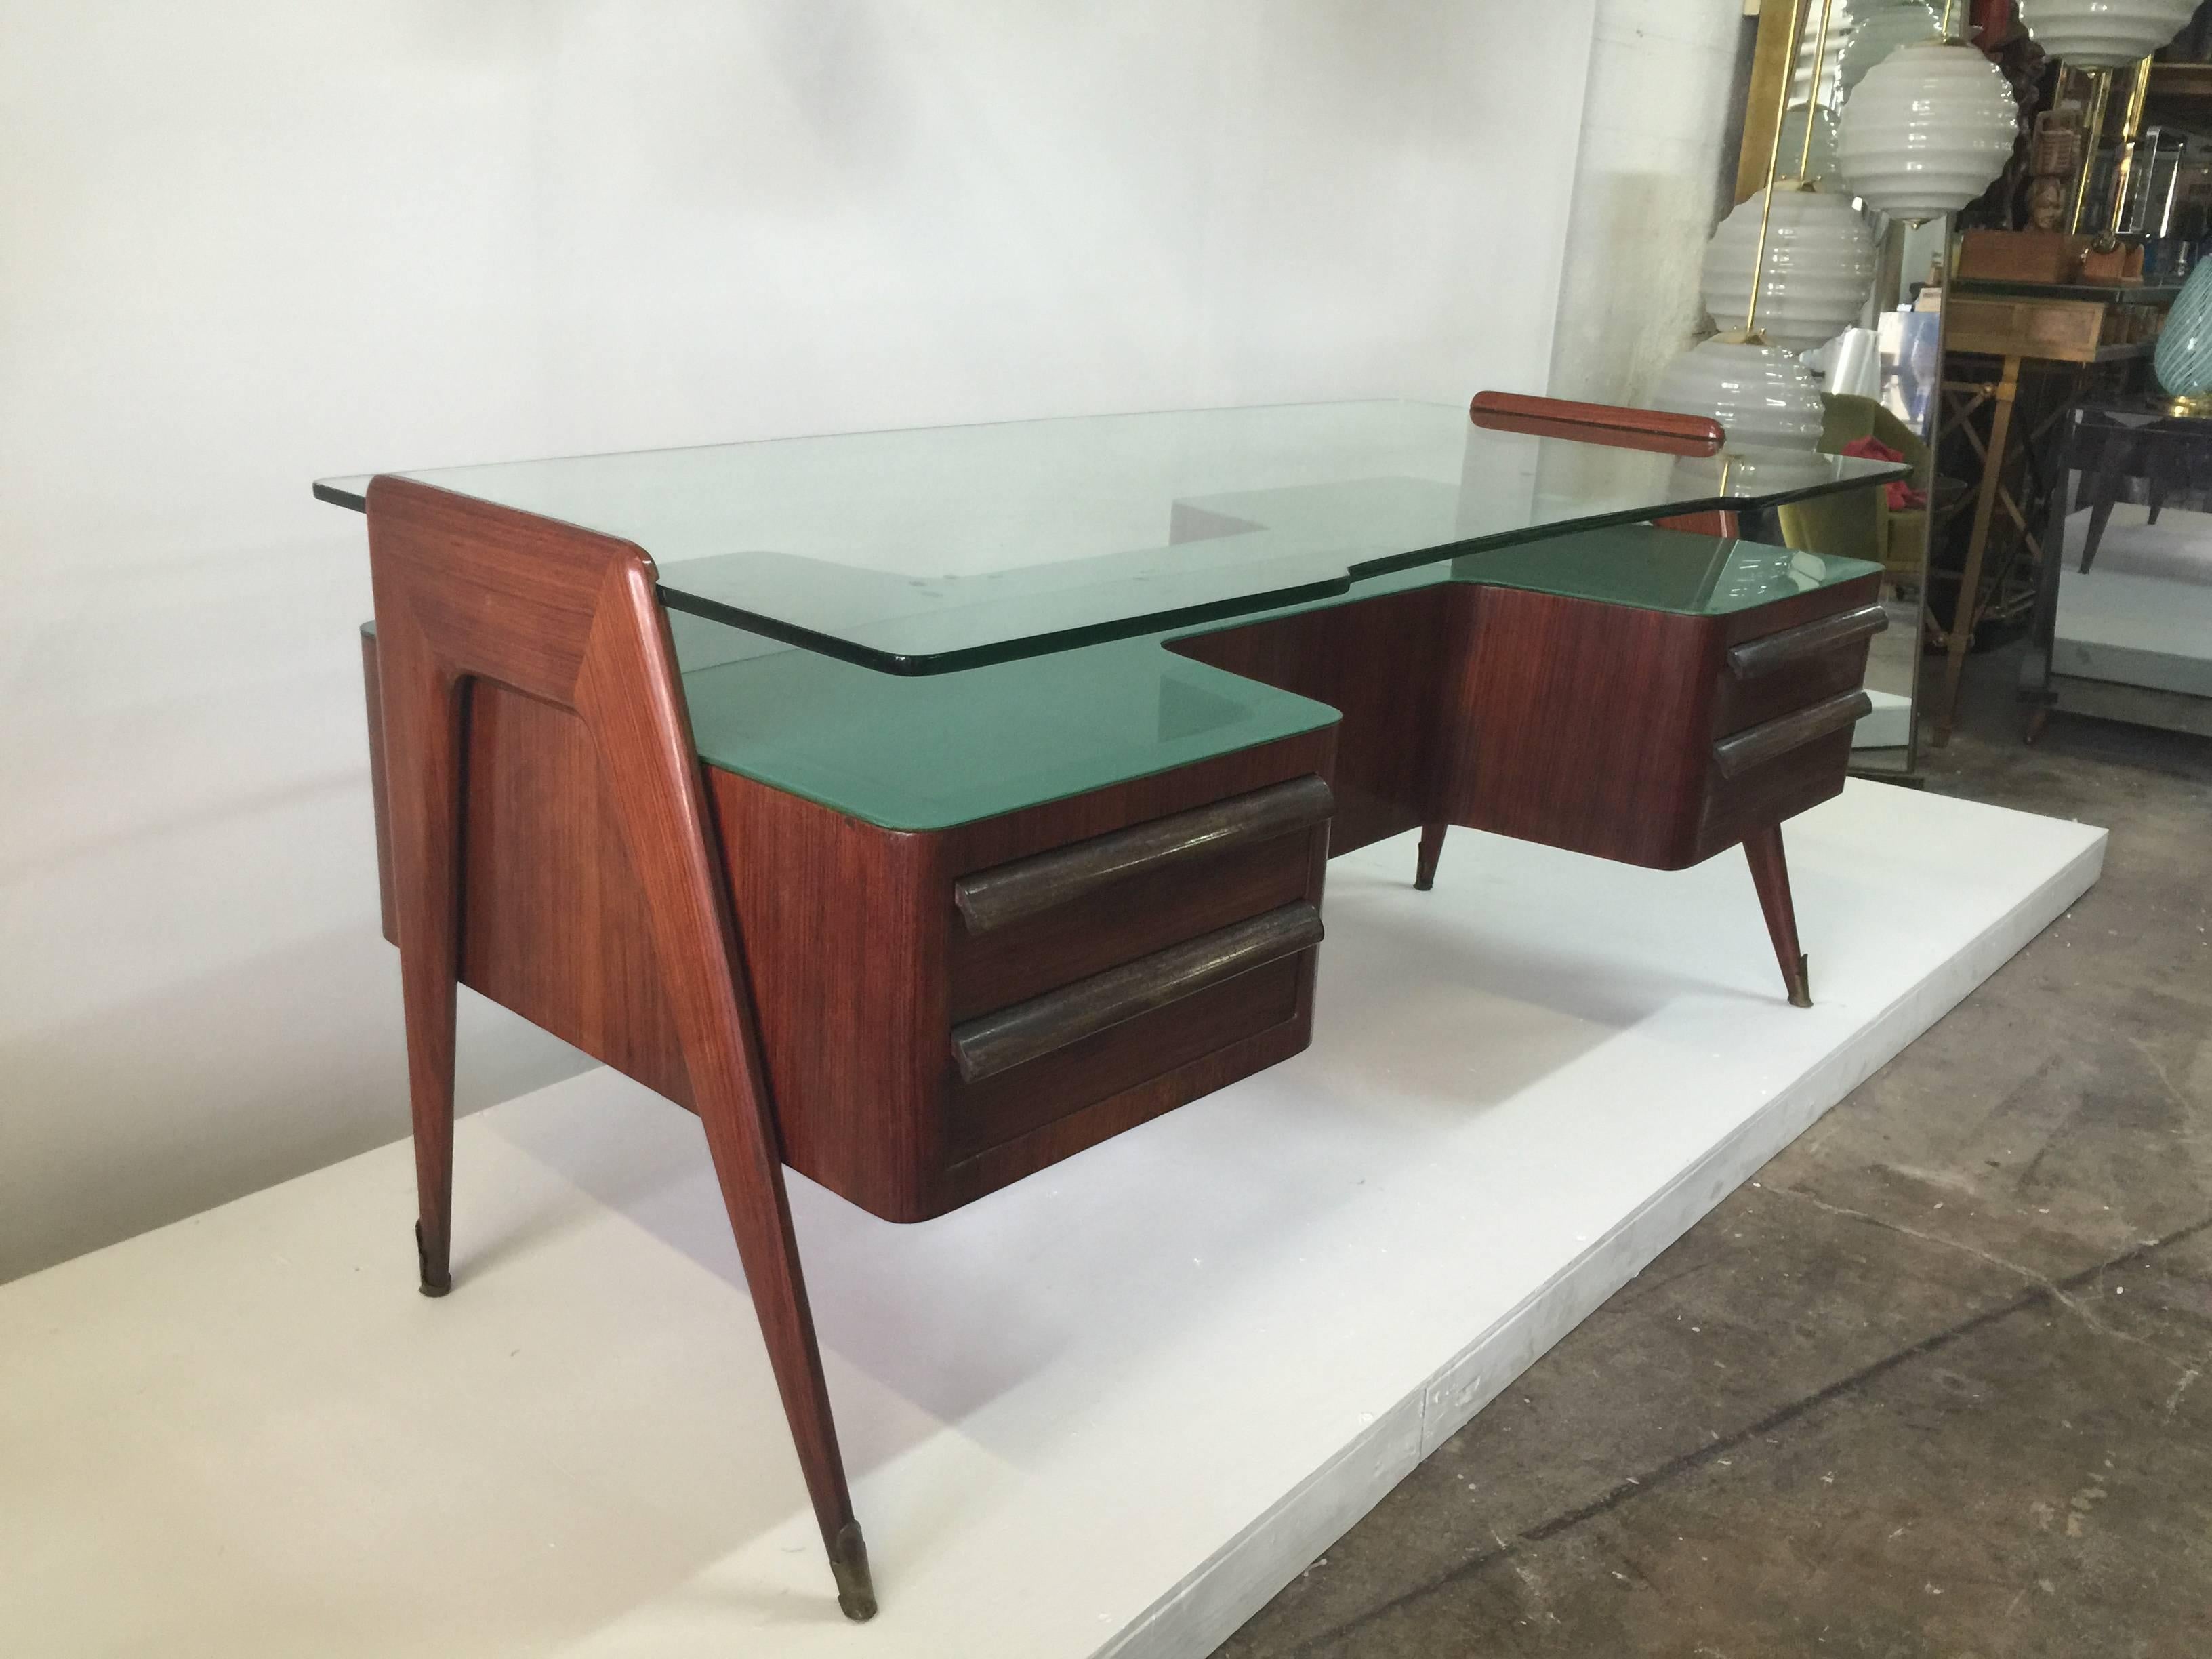 Exceptional original piece, green glass lower level and thick shaped top glass in perfect vintage condition by Vittorio Dassi. Four drawers and brass sabots to feet. 